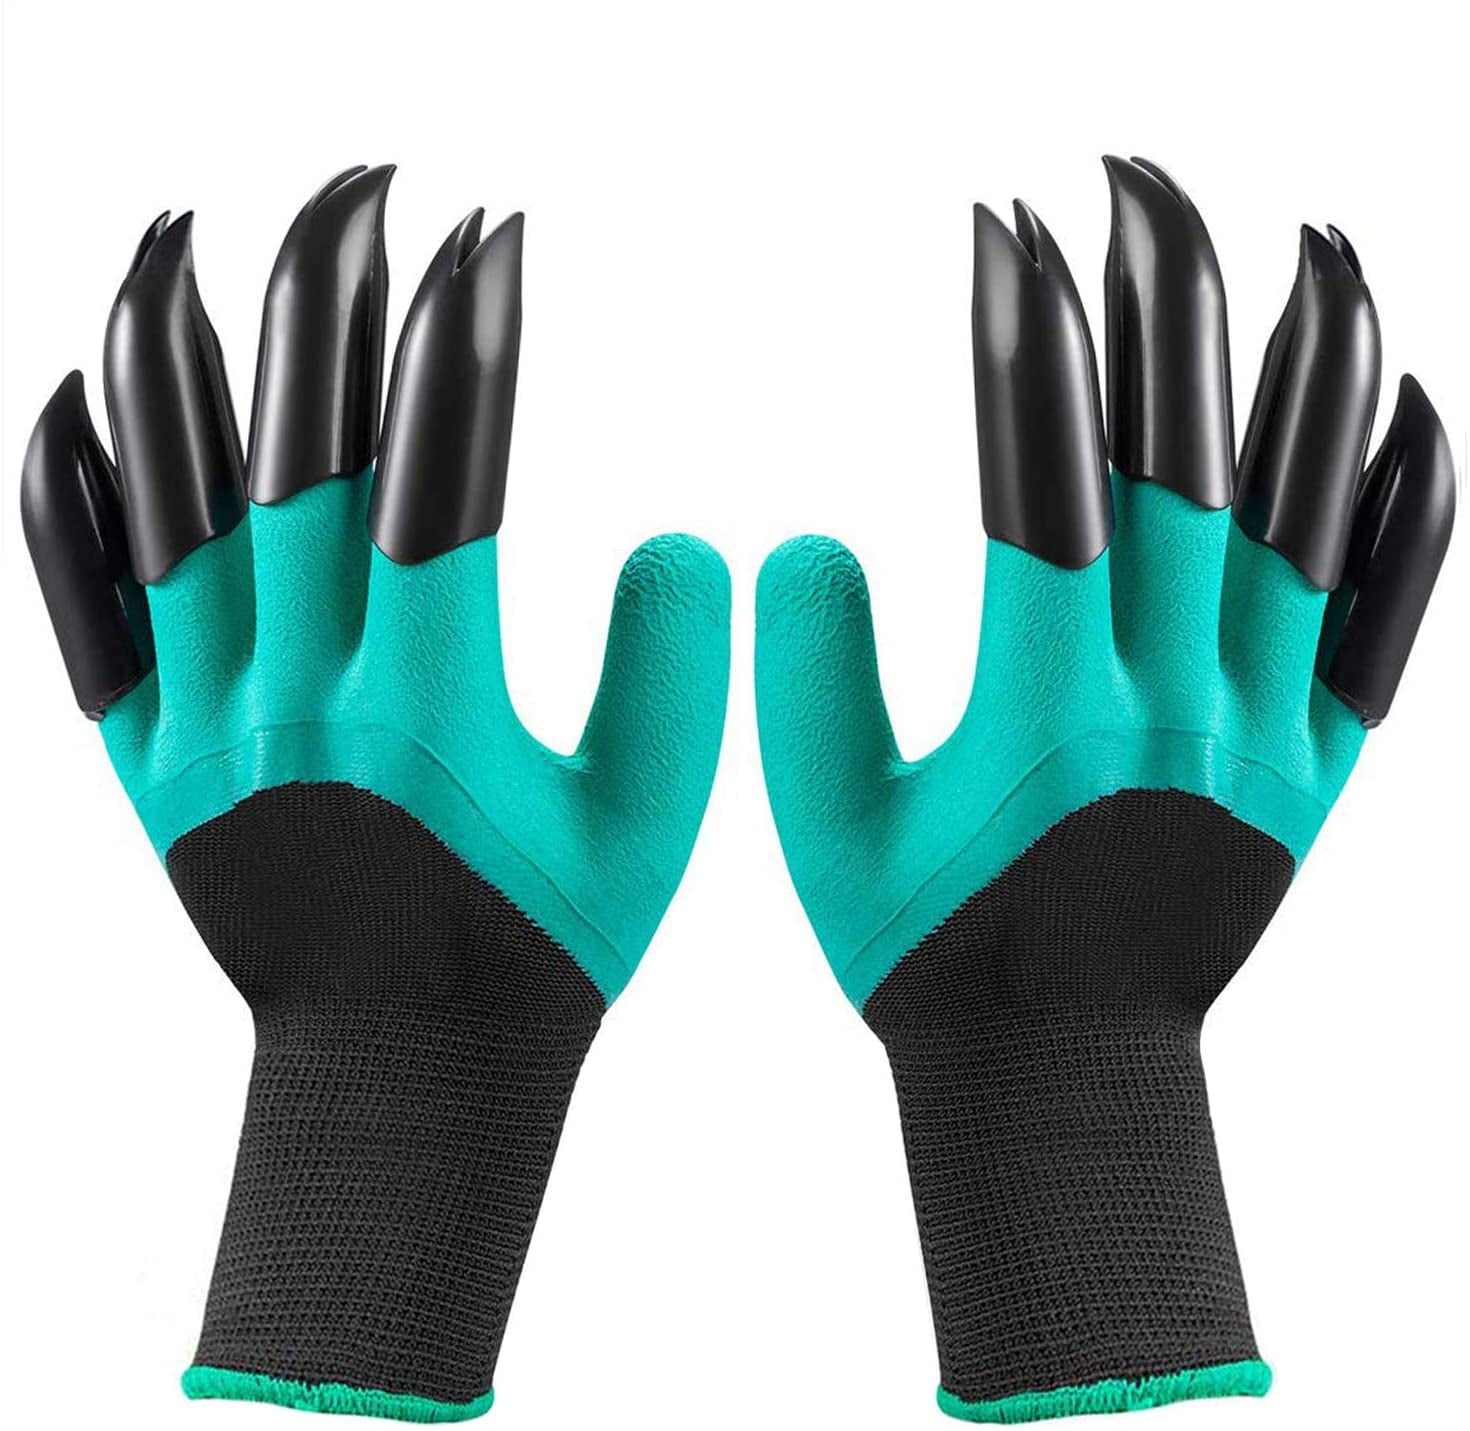 Waterproof and Breathable Garden Gloves for Women and Men Garden Genie Gloves with Claws